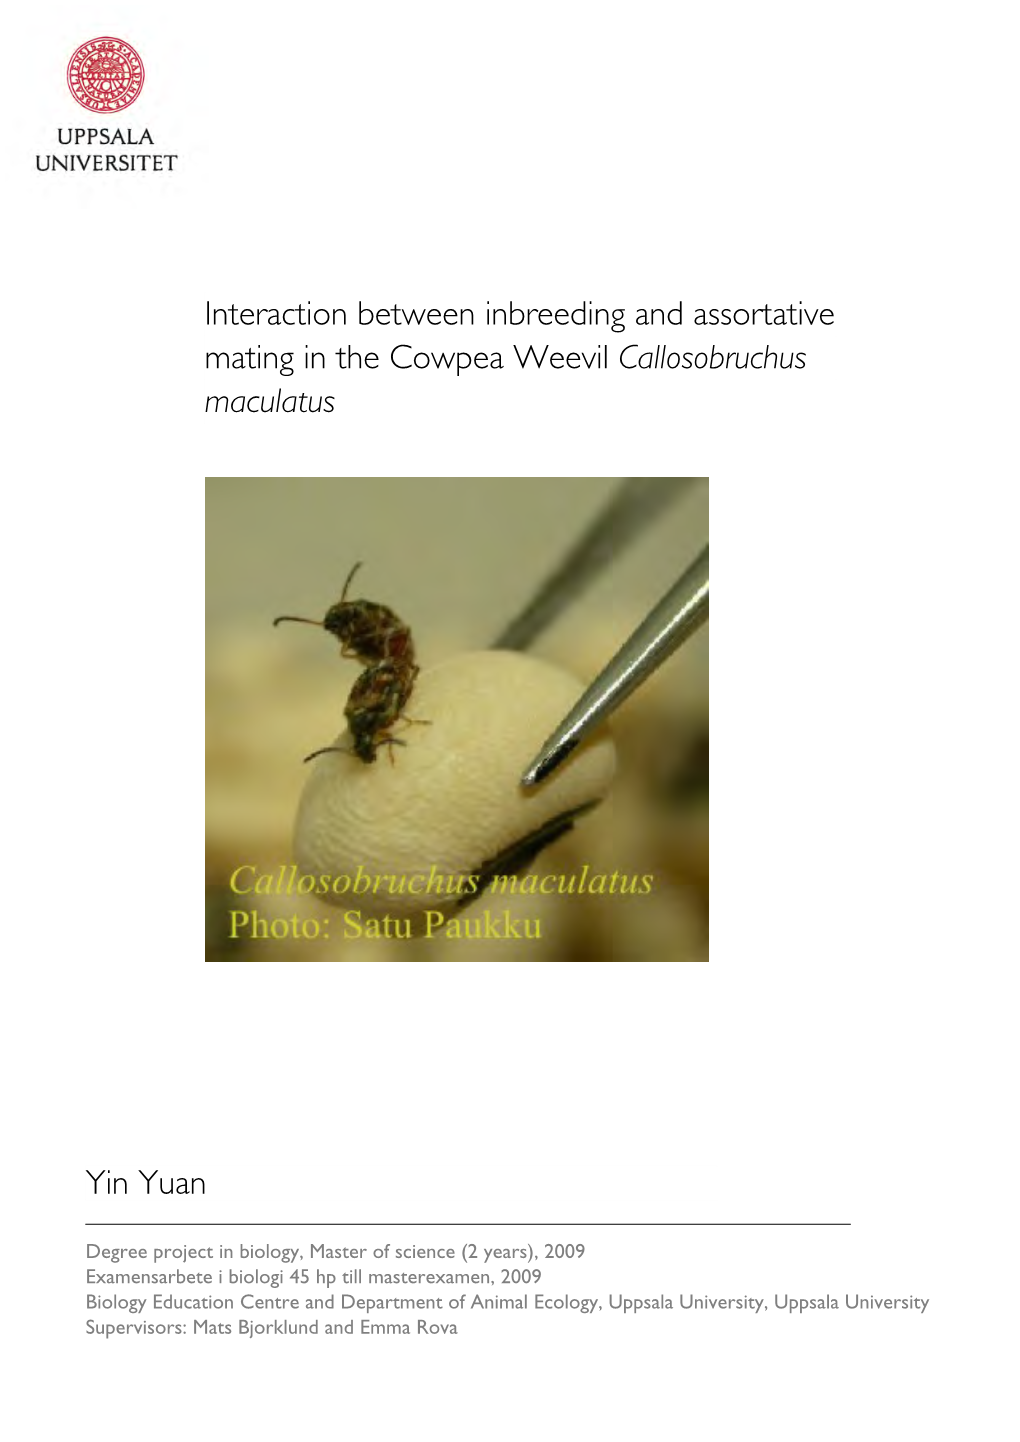 interaction-between-inbreeding-and-assortative-mating-in-the-cowpea-weevil-callosobruchus